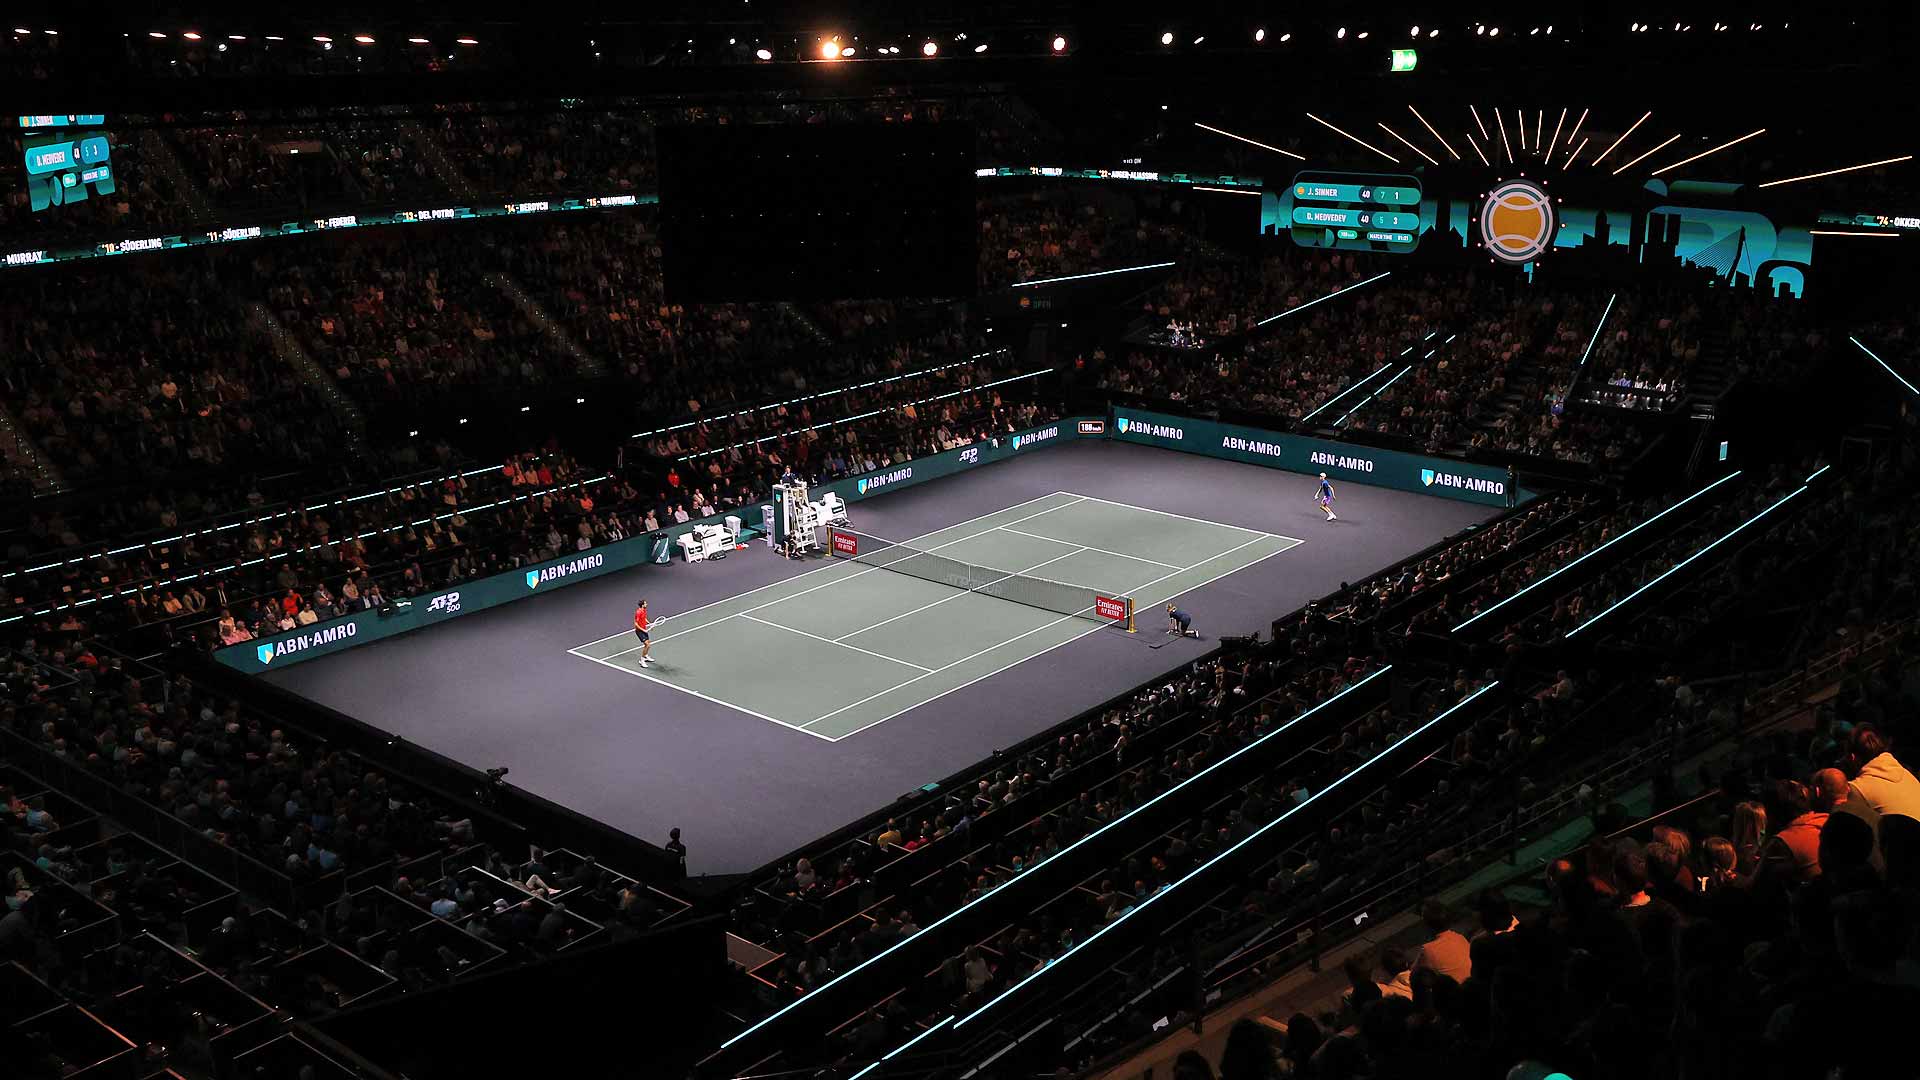 Rotterdam Ahoy will host the 2024 ABN AMRO Open from 12-18 February.